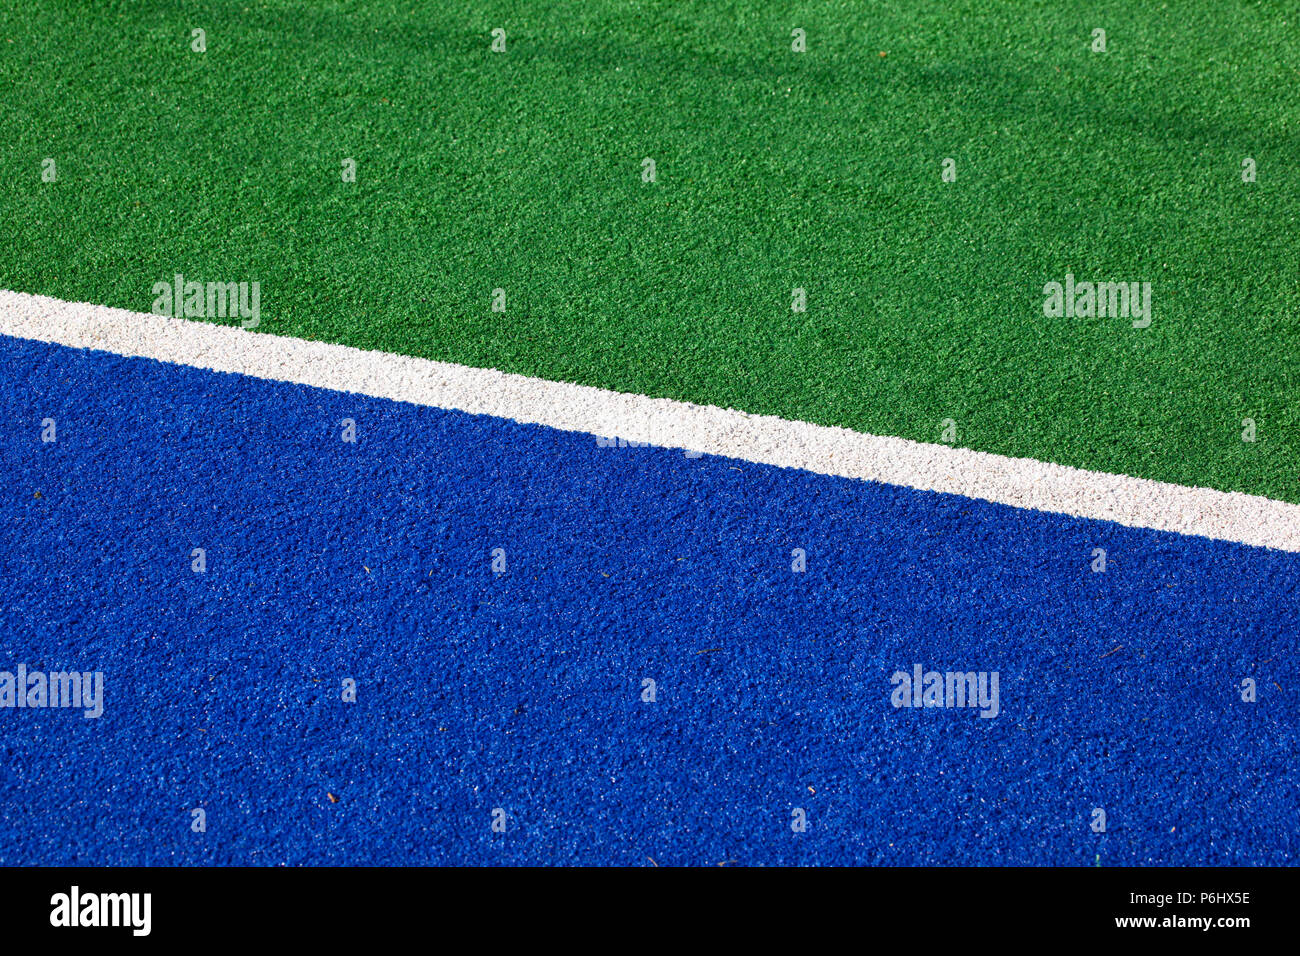 Blue and green hockey field sideline for background use. Hockey is now often played on synthetic fields. Stock Photo